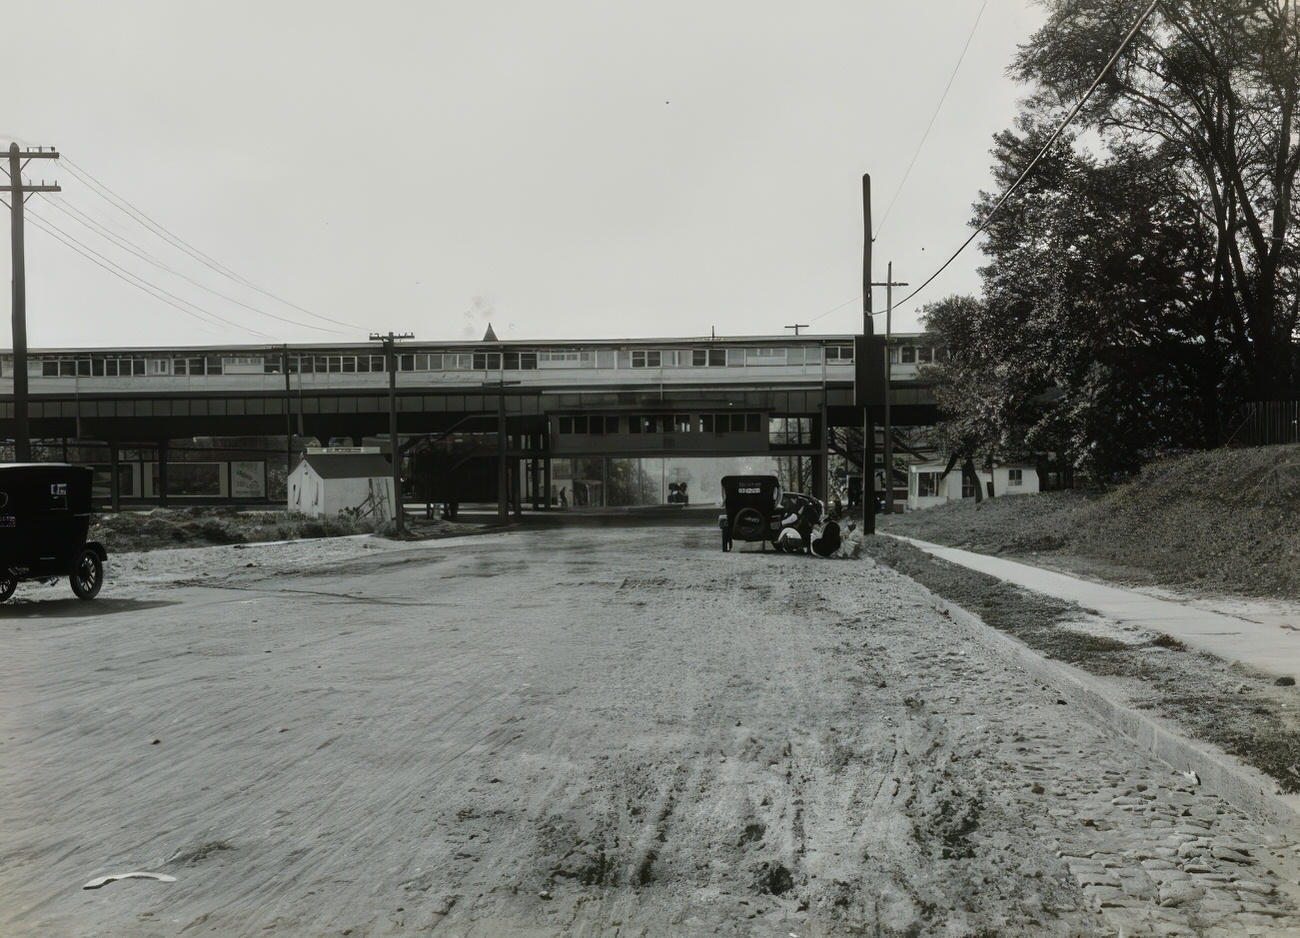 Elevated Railroad Station At 233Rd St. And Byron Ave., With Cars And People, Circa 1915.